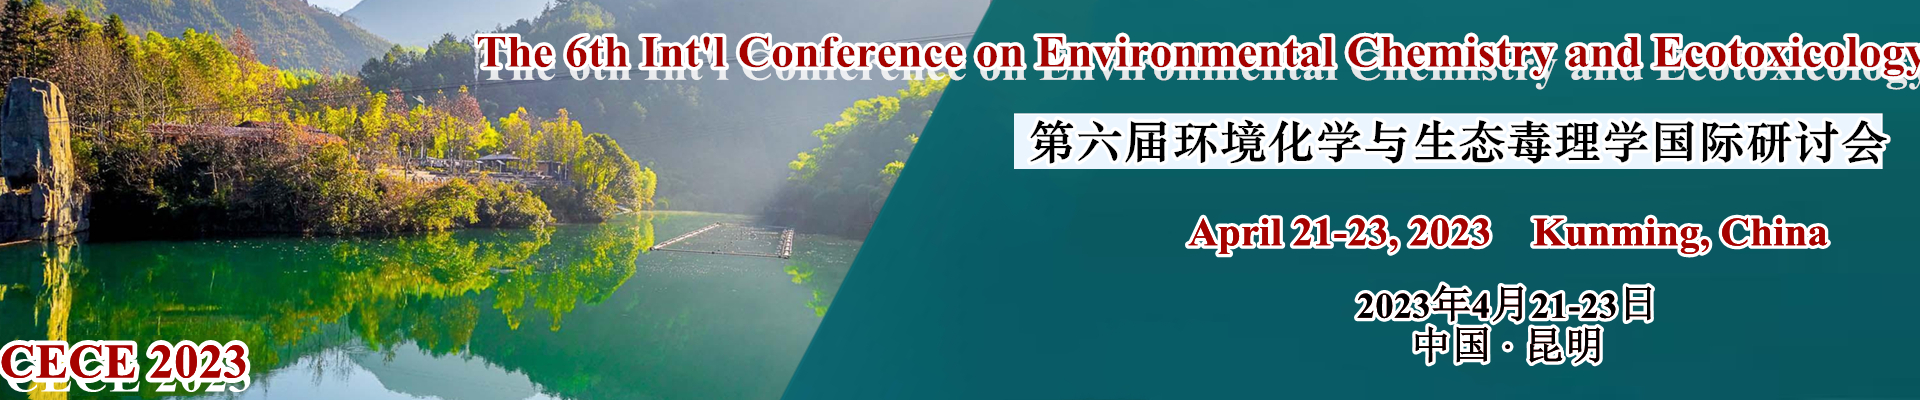 The 6th Int'l Conference on Environmental Chemistry and Ecotoxicology (CECE 2023)